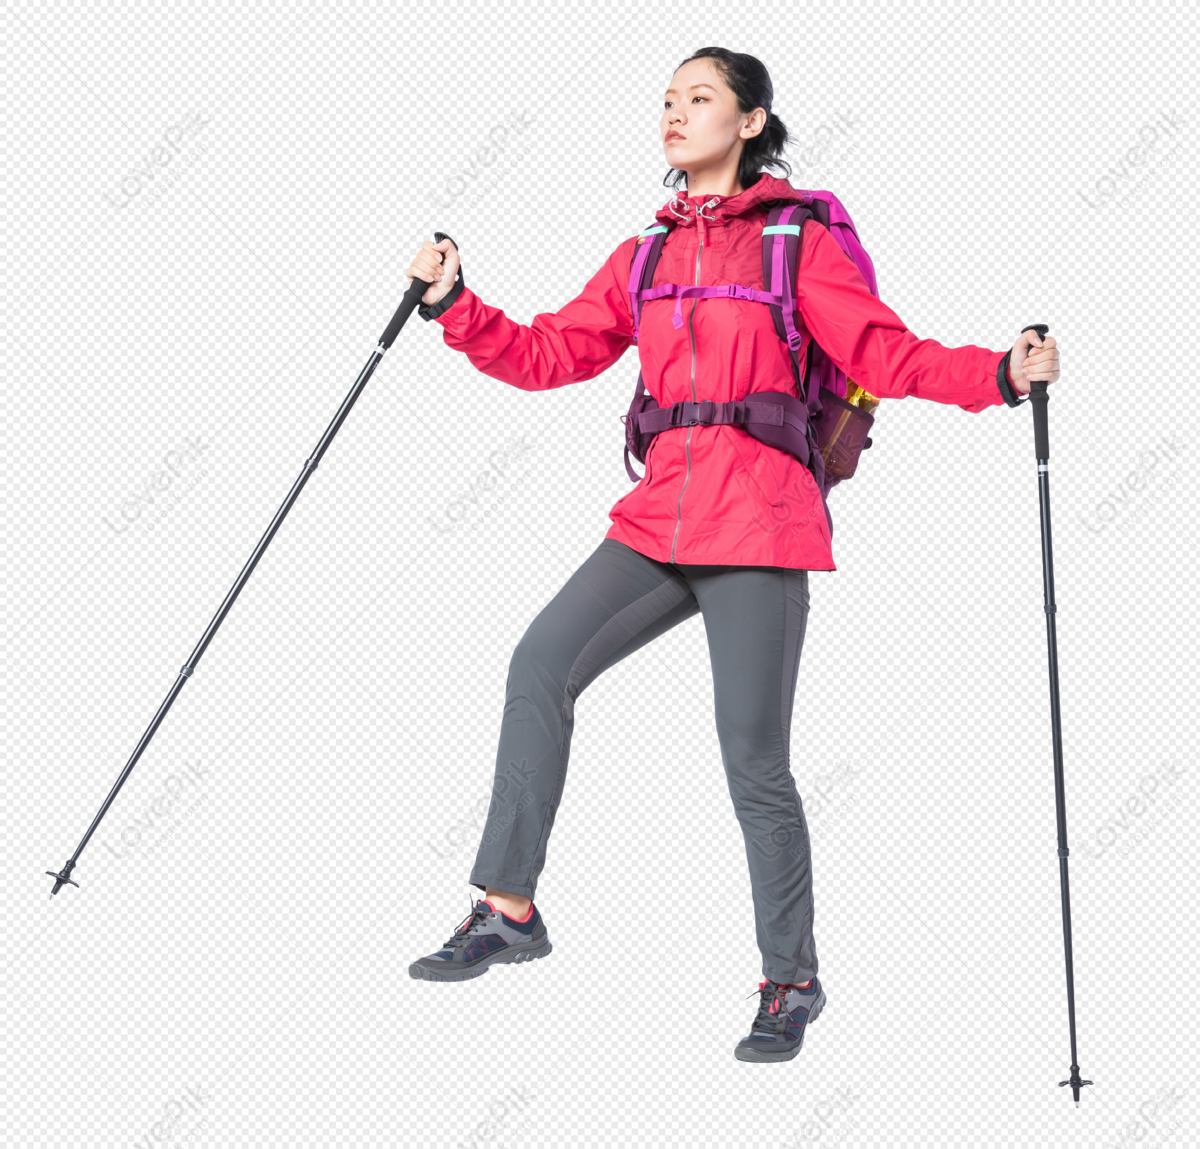 Hiking Young Women PNG Image Free Download And Clipart Image For Free ...